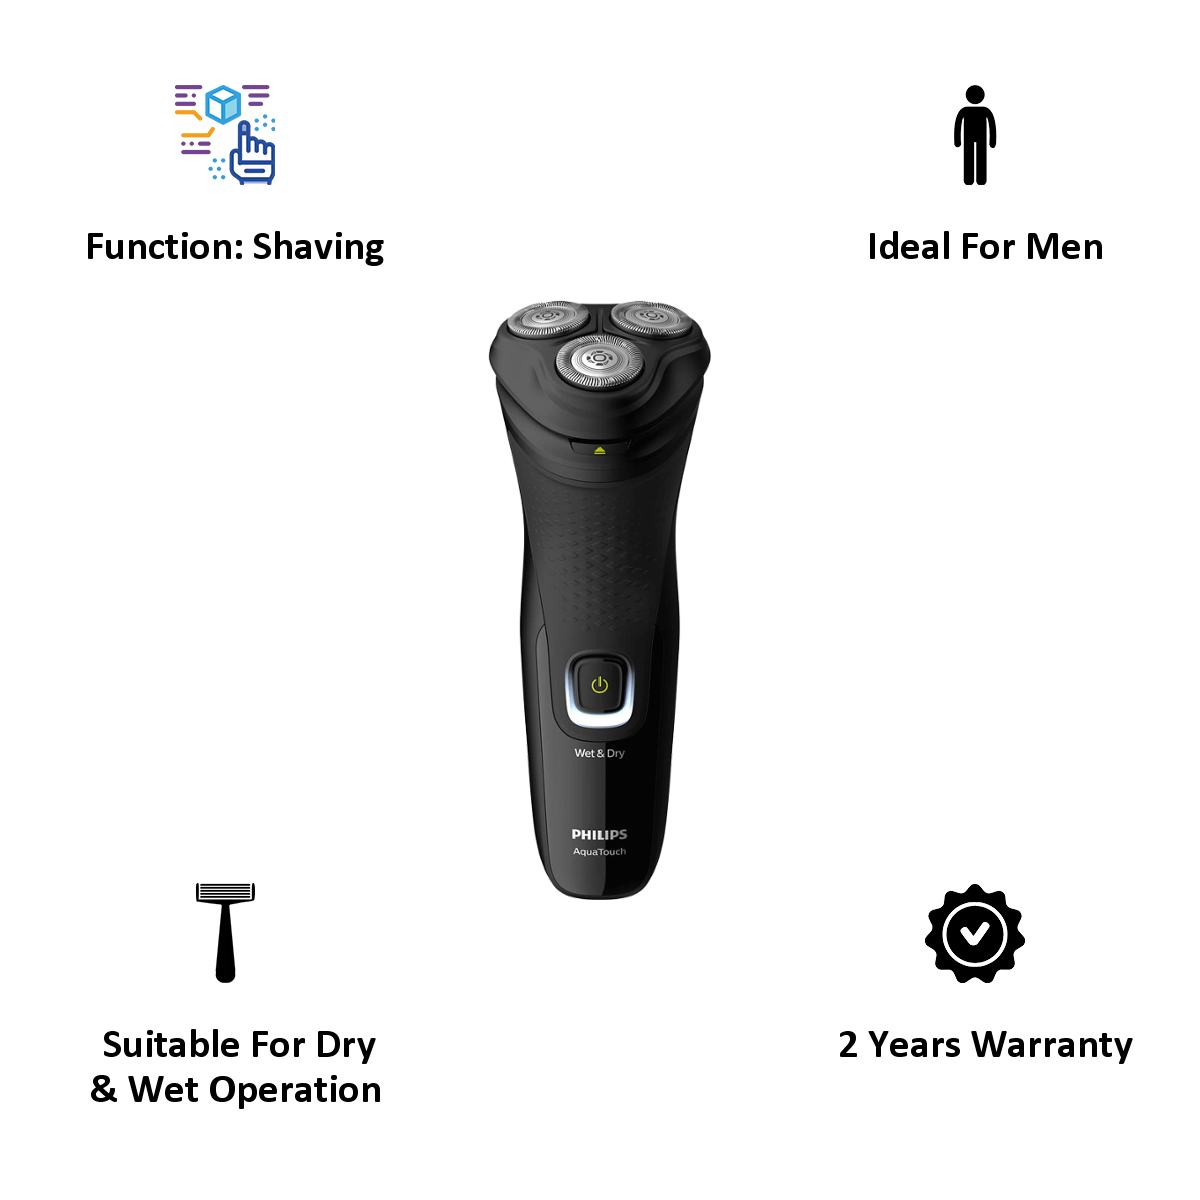 Philips AquaTouch Shaver 1200 Self-sharpening Blades Cordless Wet & Dry Shaver (Pop-up trimmer, 40 Min Run Time/10h Charge, S1223/45, Black)_3